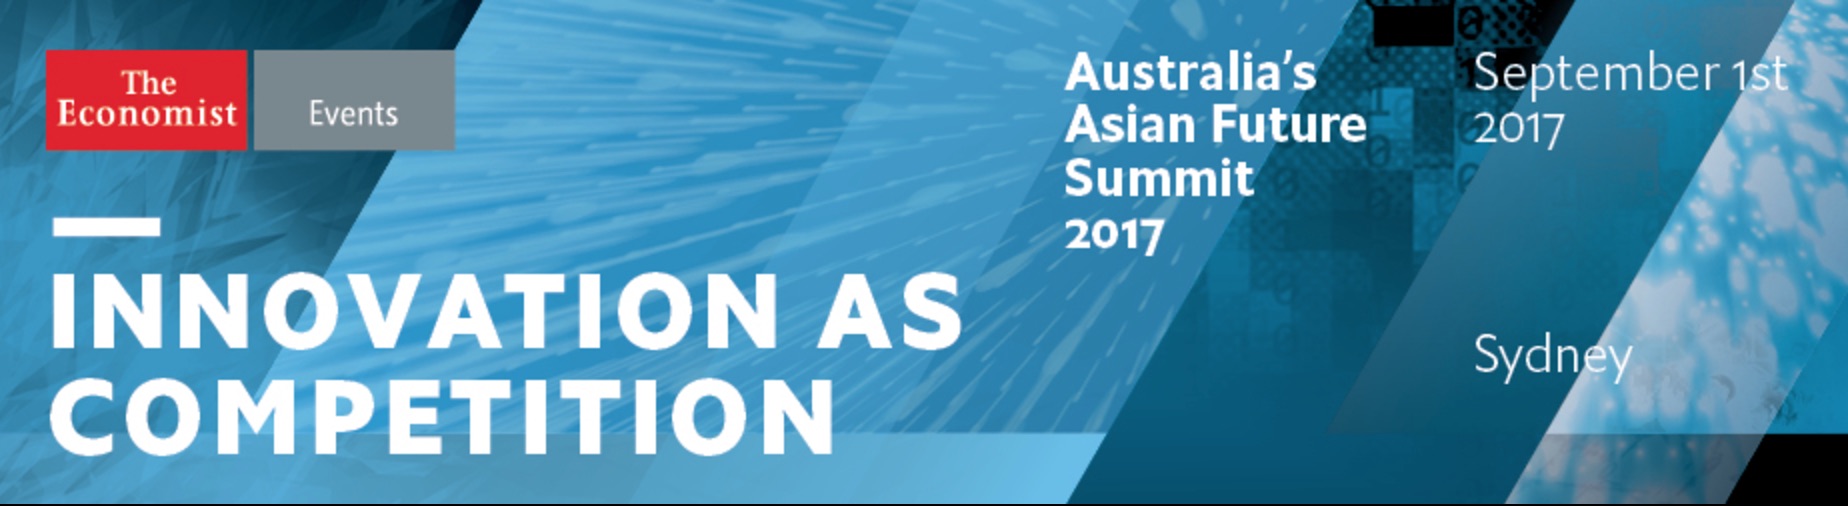 Innovation as Competition: Australia’s Asian Future Summit 2017